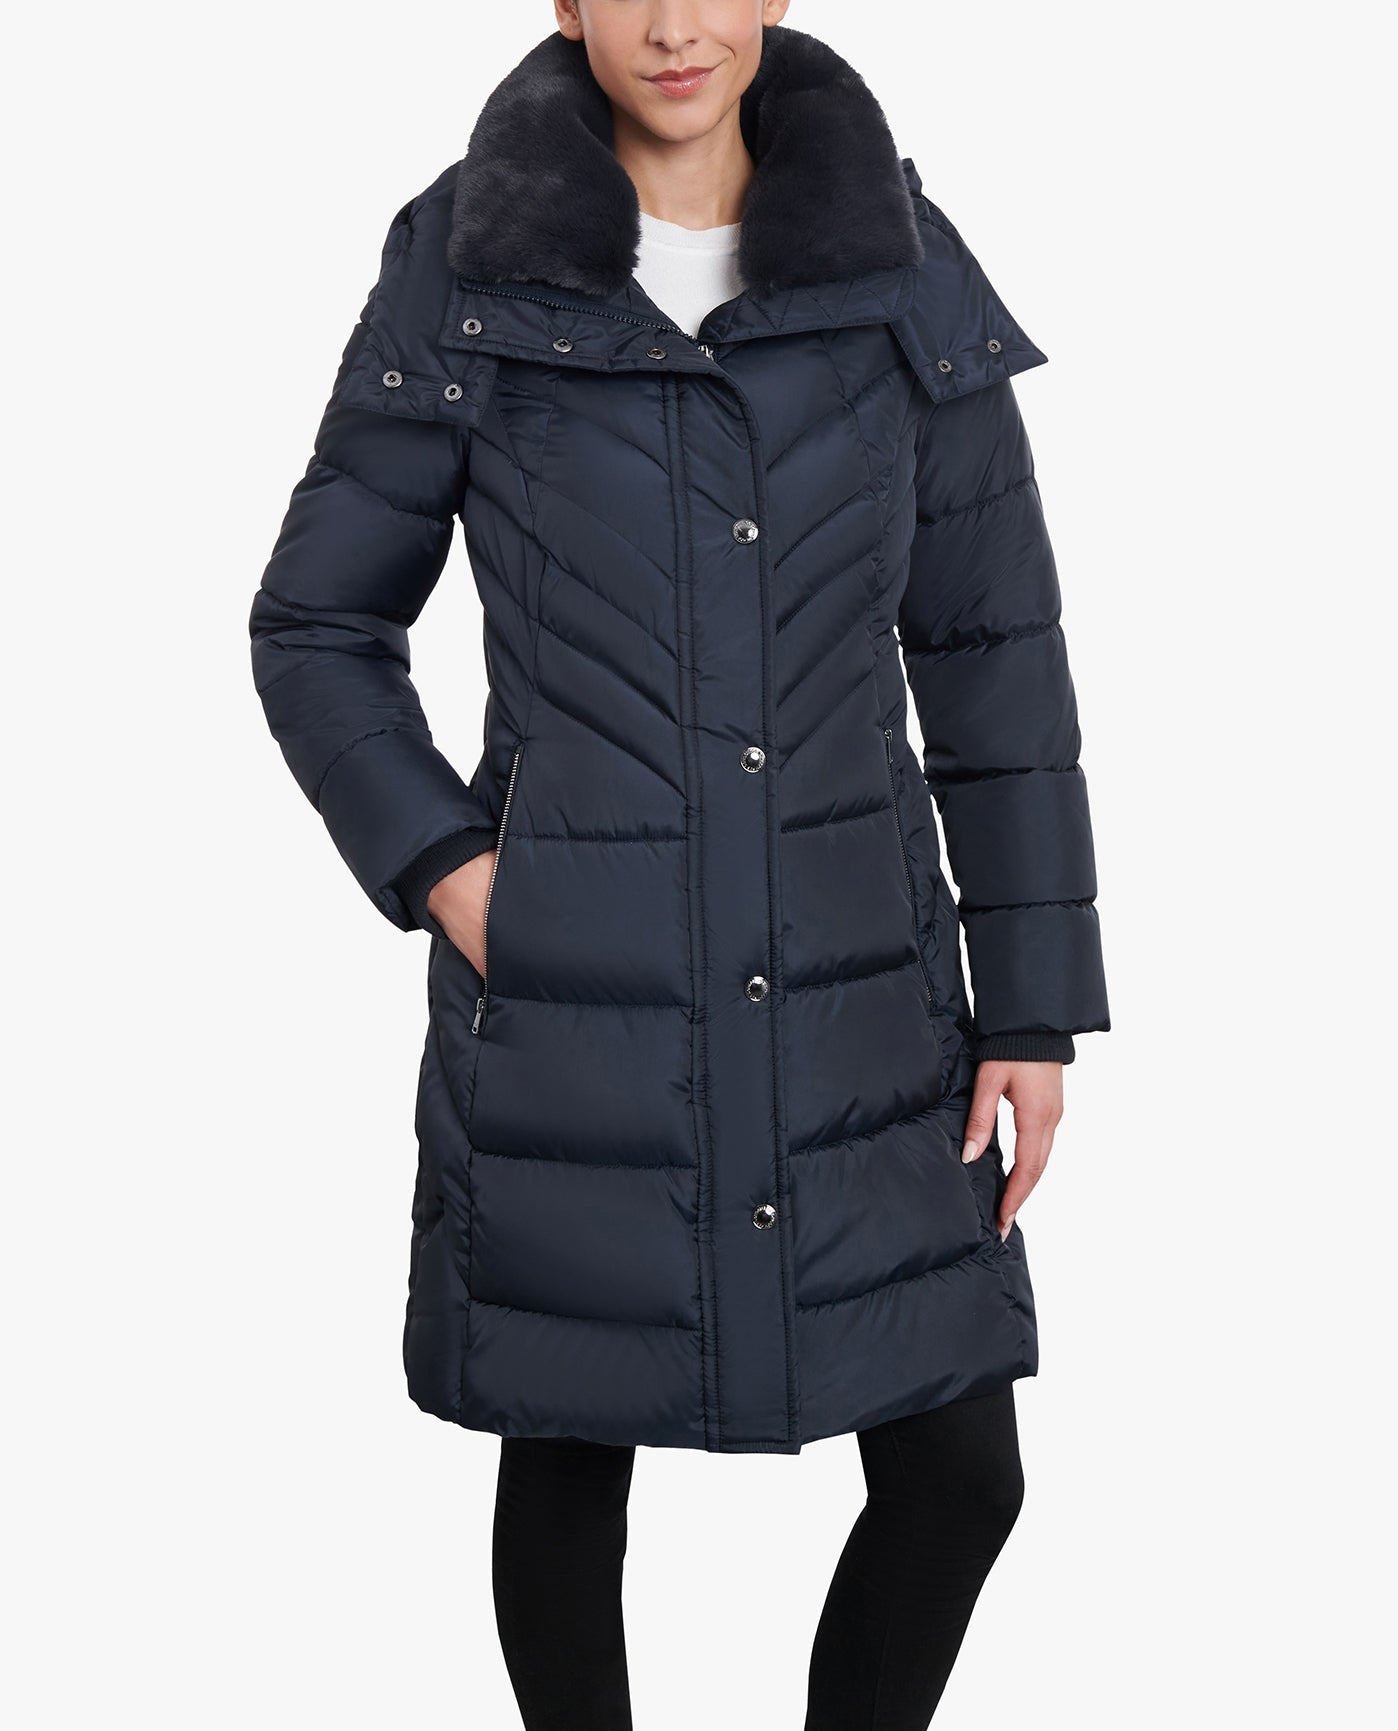 Plus Size Zip-Front Hooded Heavy Weight Puffer Jacket with Button